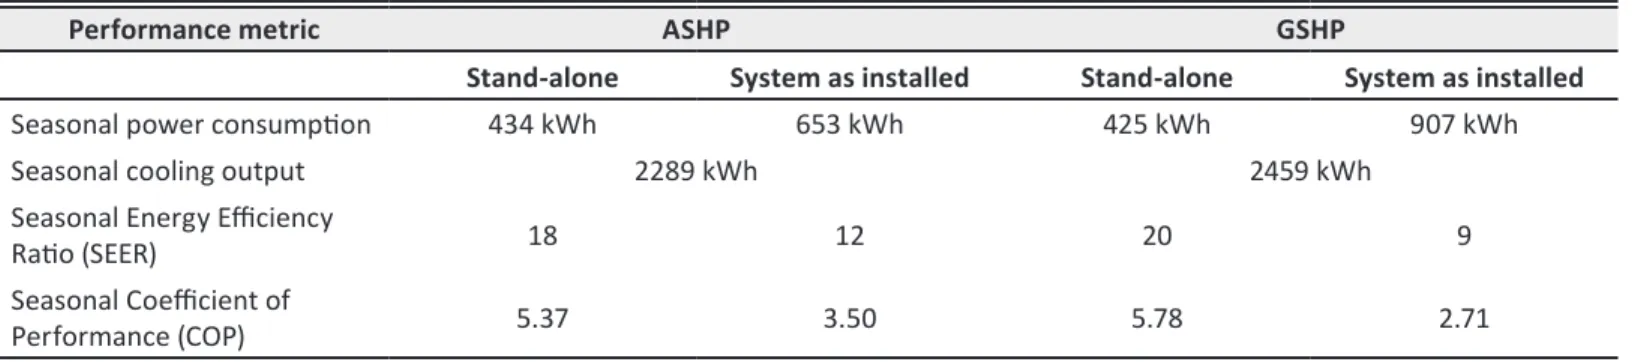 Table 5: ASHP and GSHP system performance during the cooling season